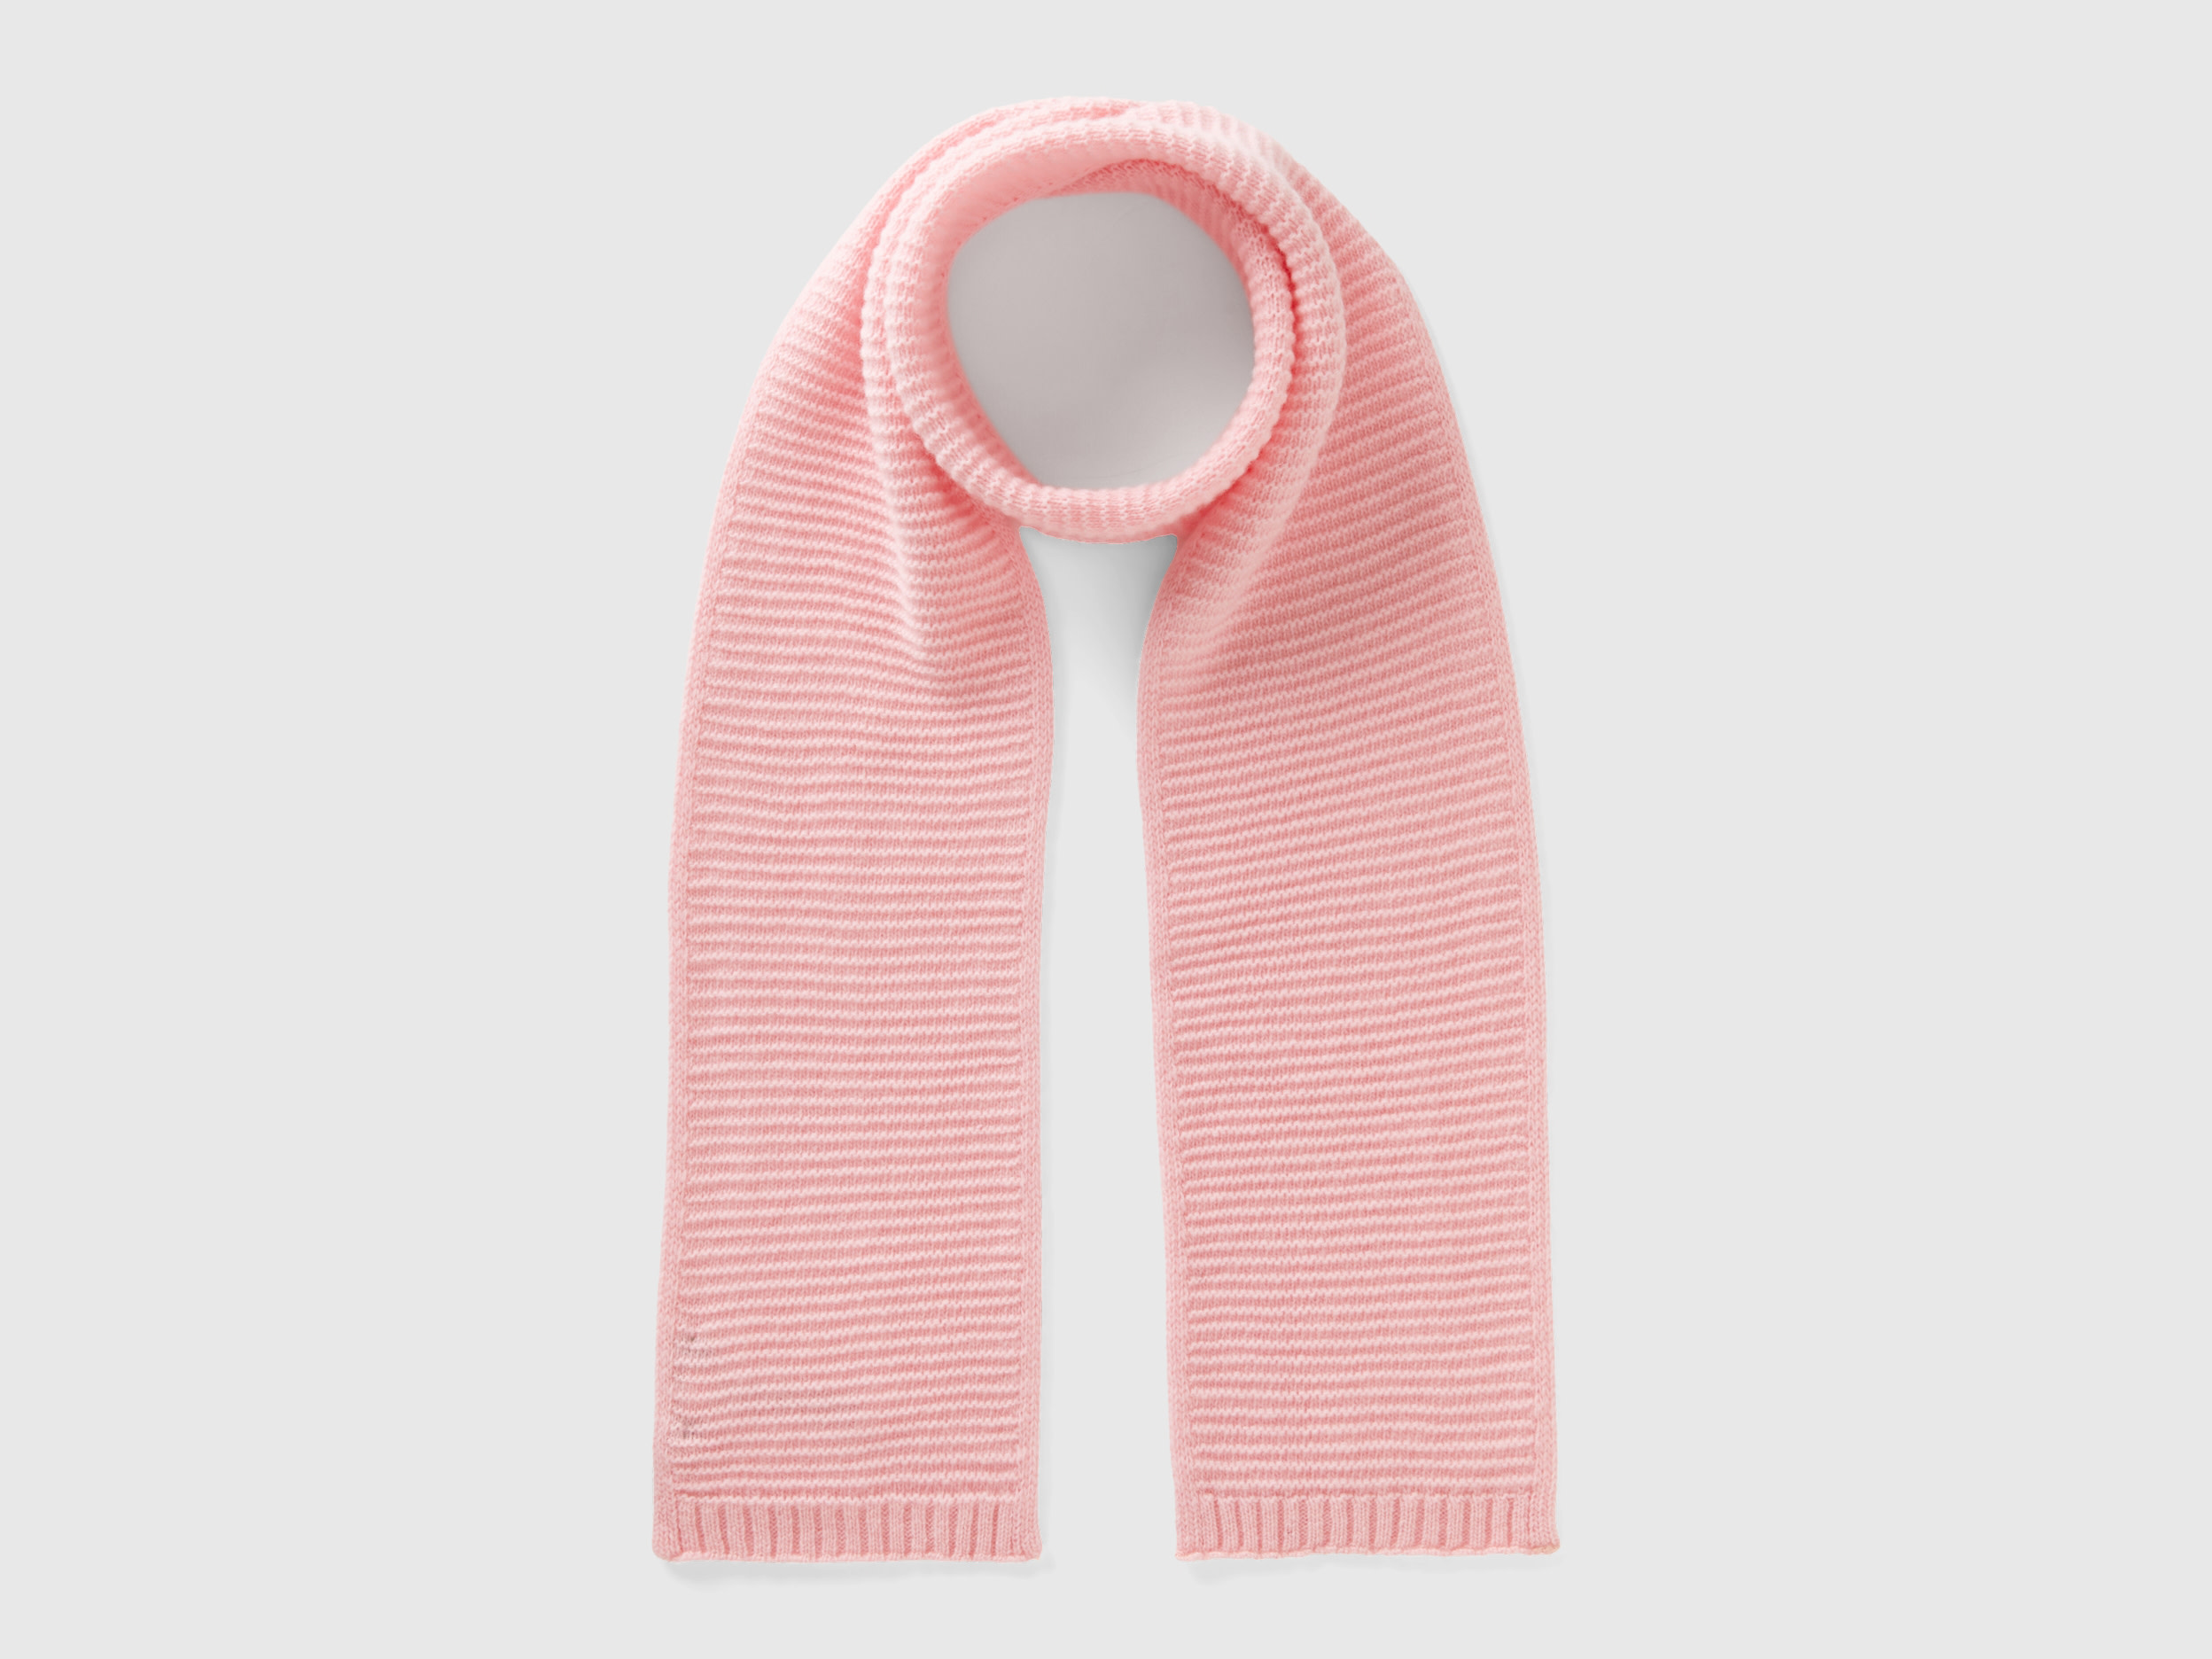 Benetton, Knit Scarf In Stretch Wool Blend, size 4-6, Pink, Kids